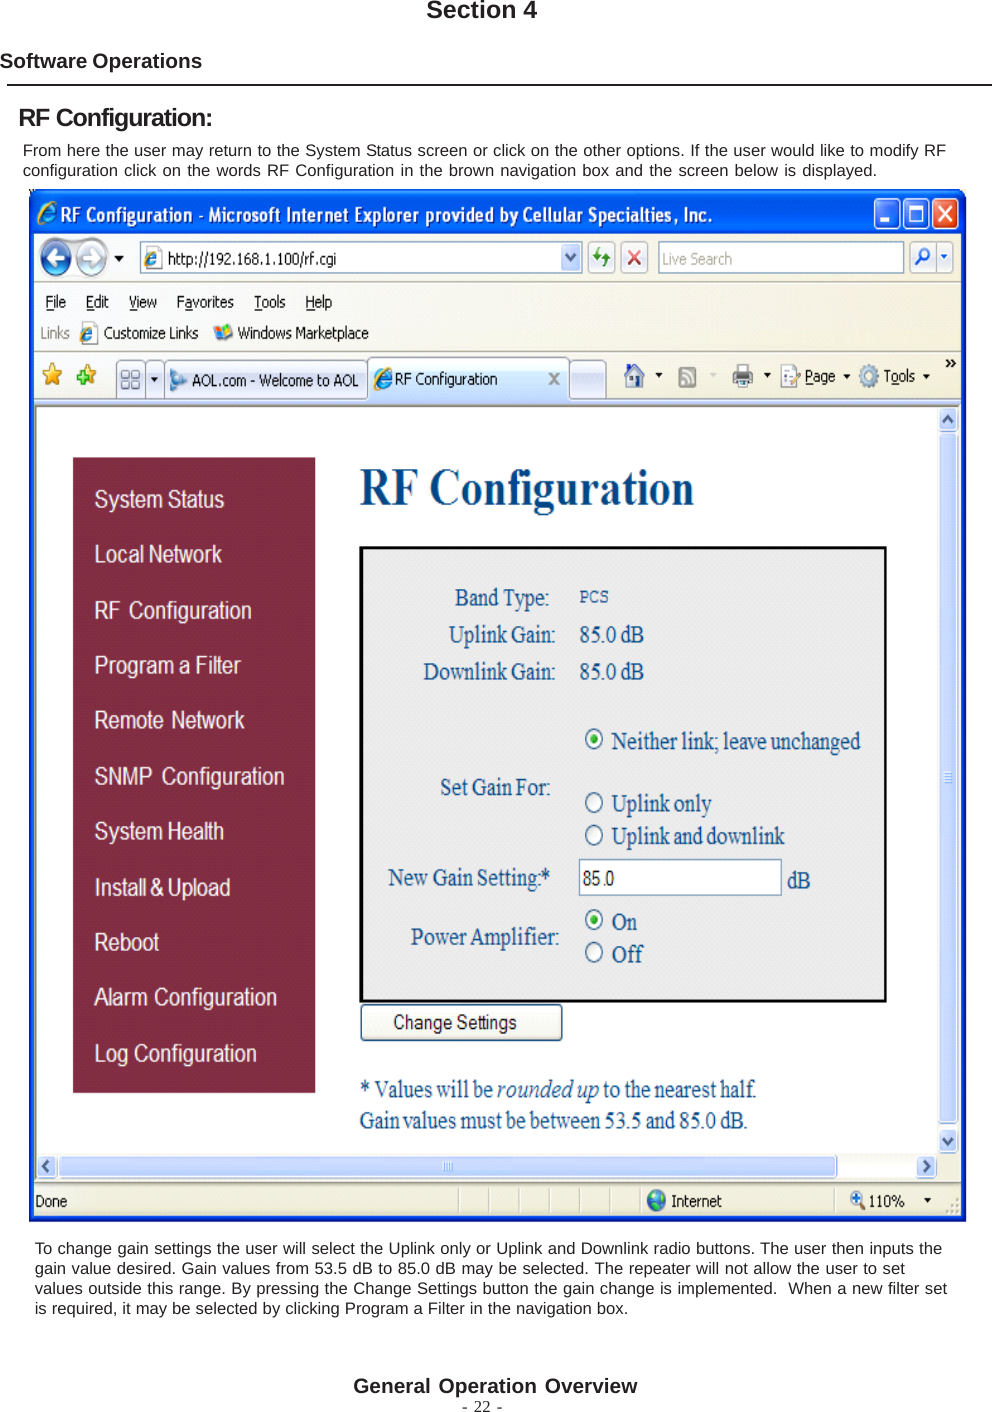 - 22 -Software OperationsSection 4From here the user may return to the System Status screen or click on the other options. If the user would like to modify RFconfiguration click on the words RF Configuration in the brown navigation box and the screen below is displayed.RF Configuration:To change gain settings the user will select the Uplink only or Uplink and Downlink radio buttons. The user then inputs thegain value desired. Gain values from 53.5 dB to 85.0 dB may be selected. The repeater will not allow the user to setvalues outside this range. By pressing the Change Settings button the gain change is implemented.  When a new filter setis required, it may be selected by clicking Program a Filter in the navigation box.General Operation Overview